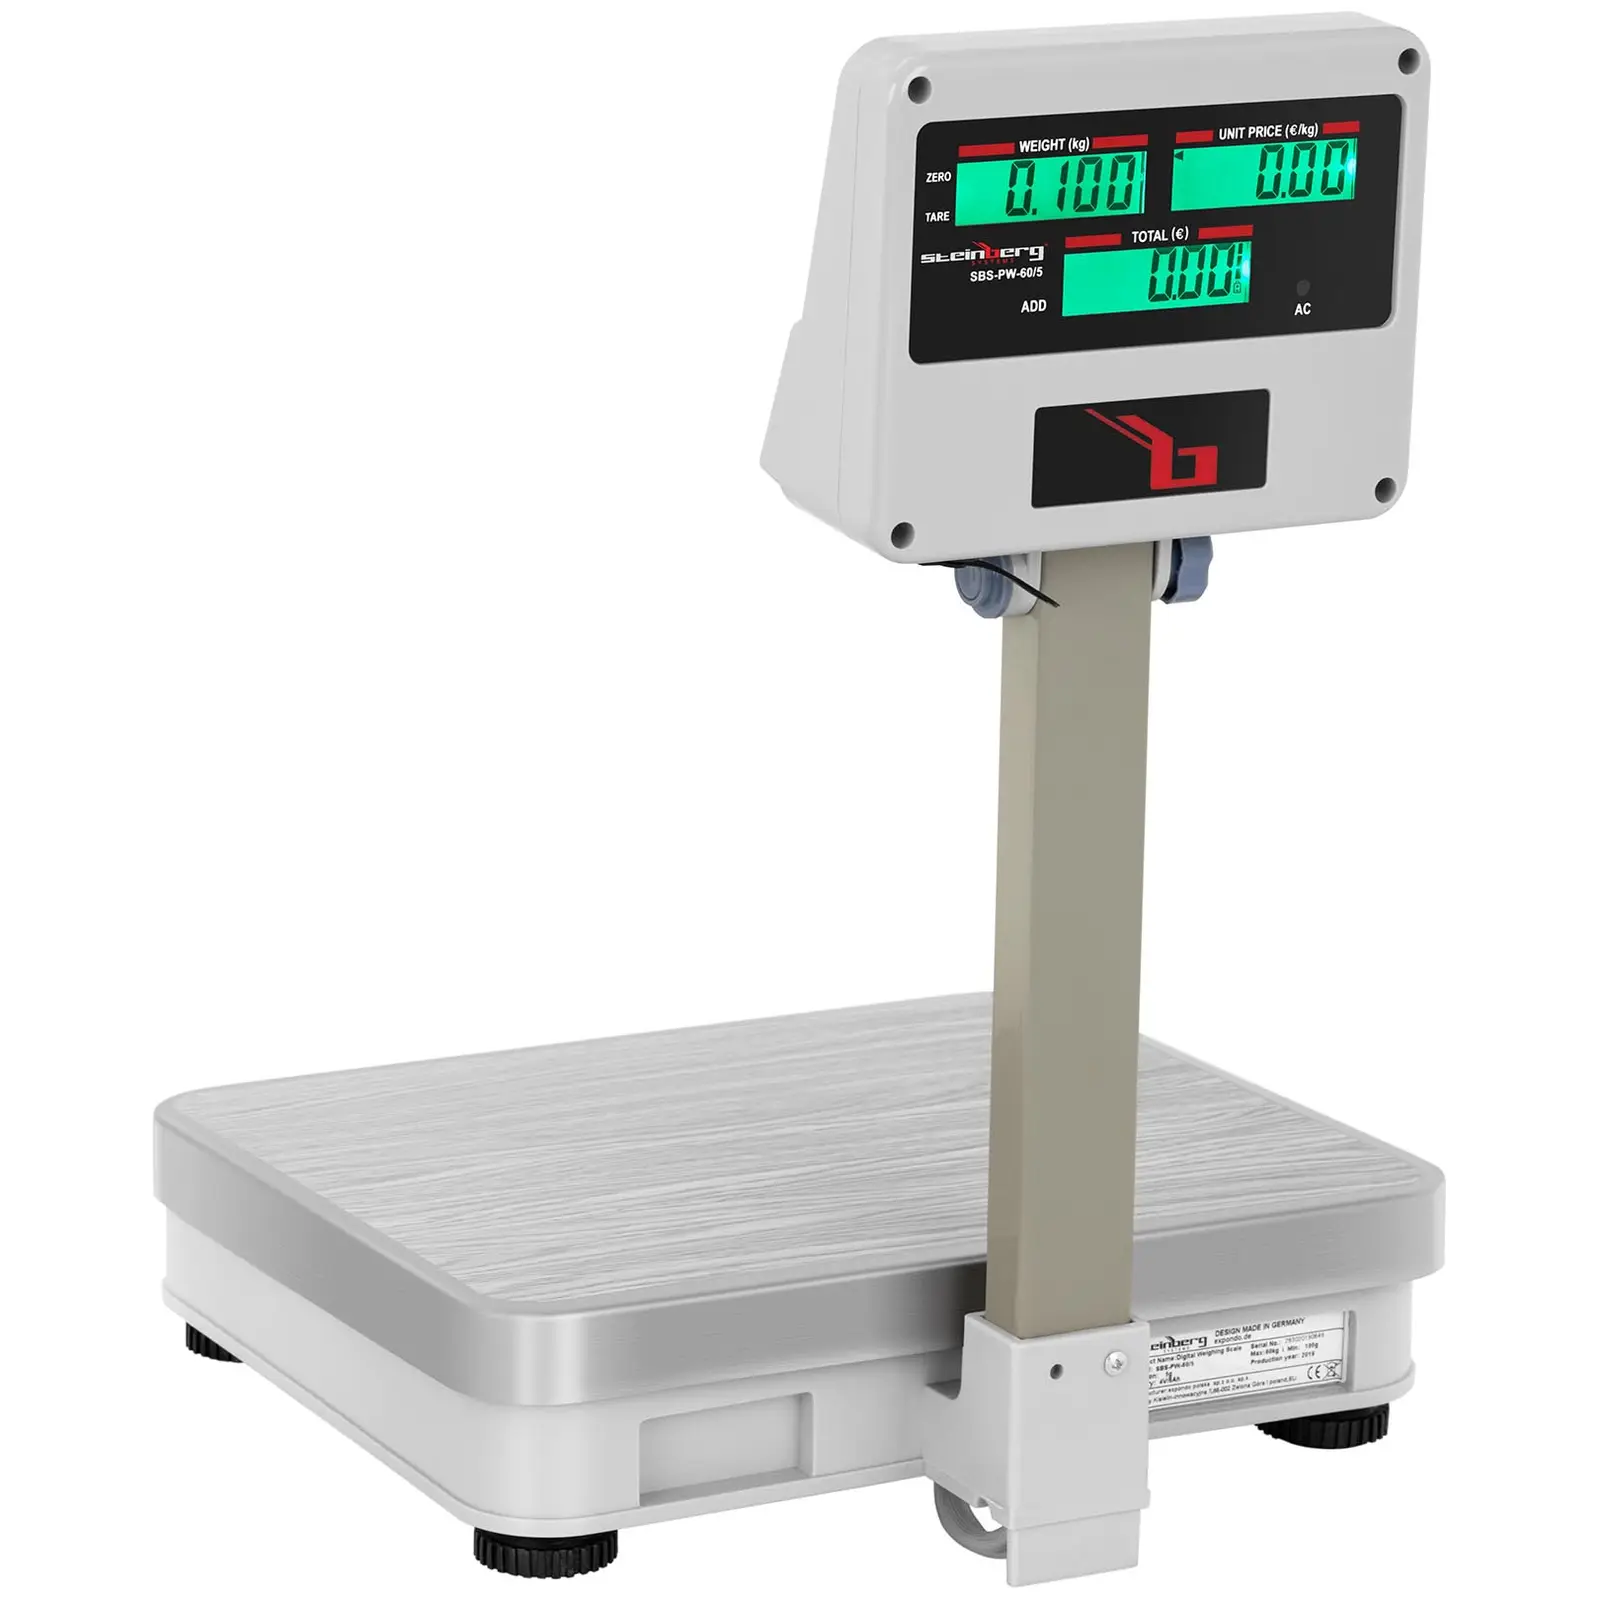 Factory second Digital Weighing Scale with Raised LCD Display - 100 kg / 10 g